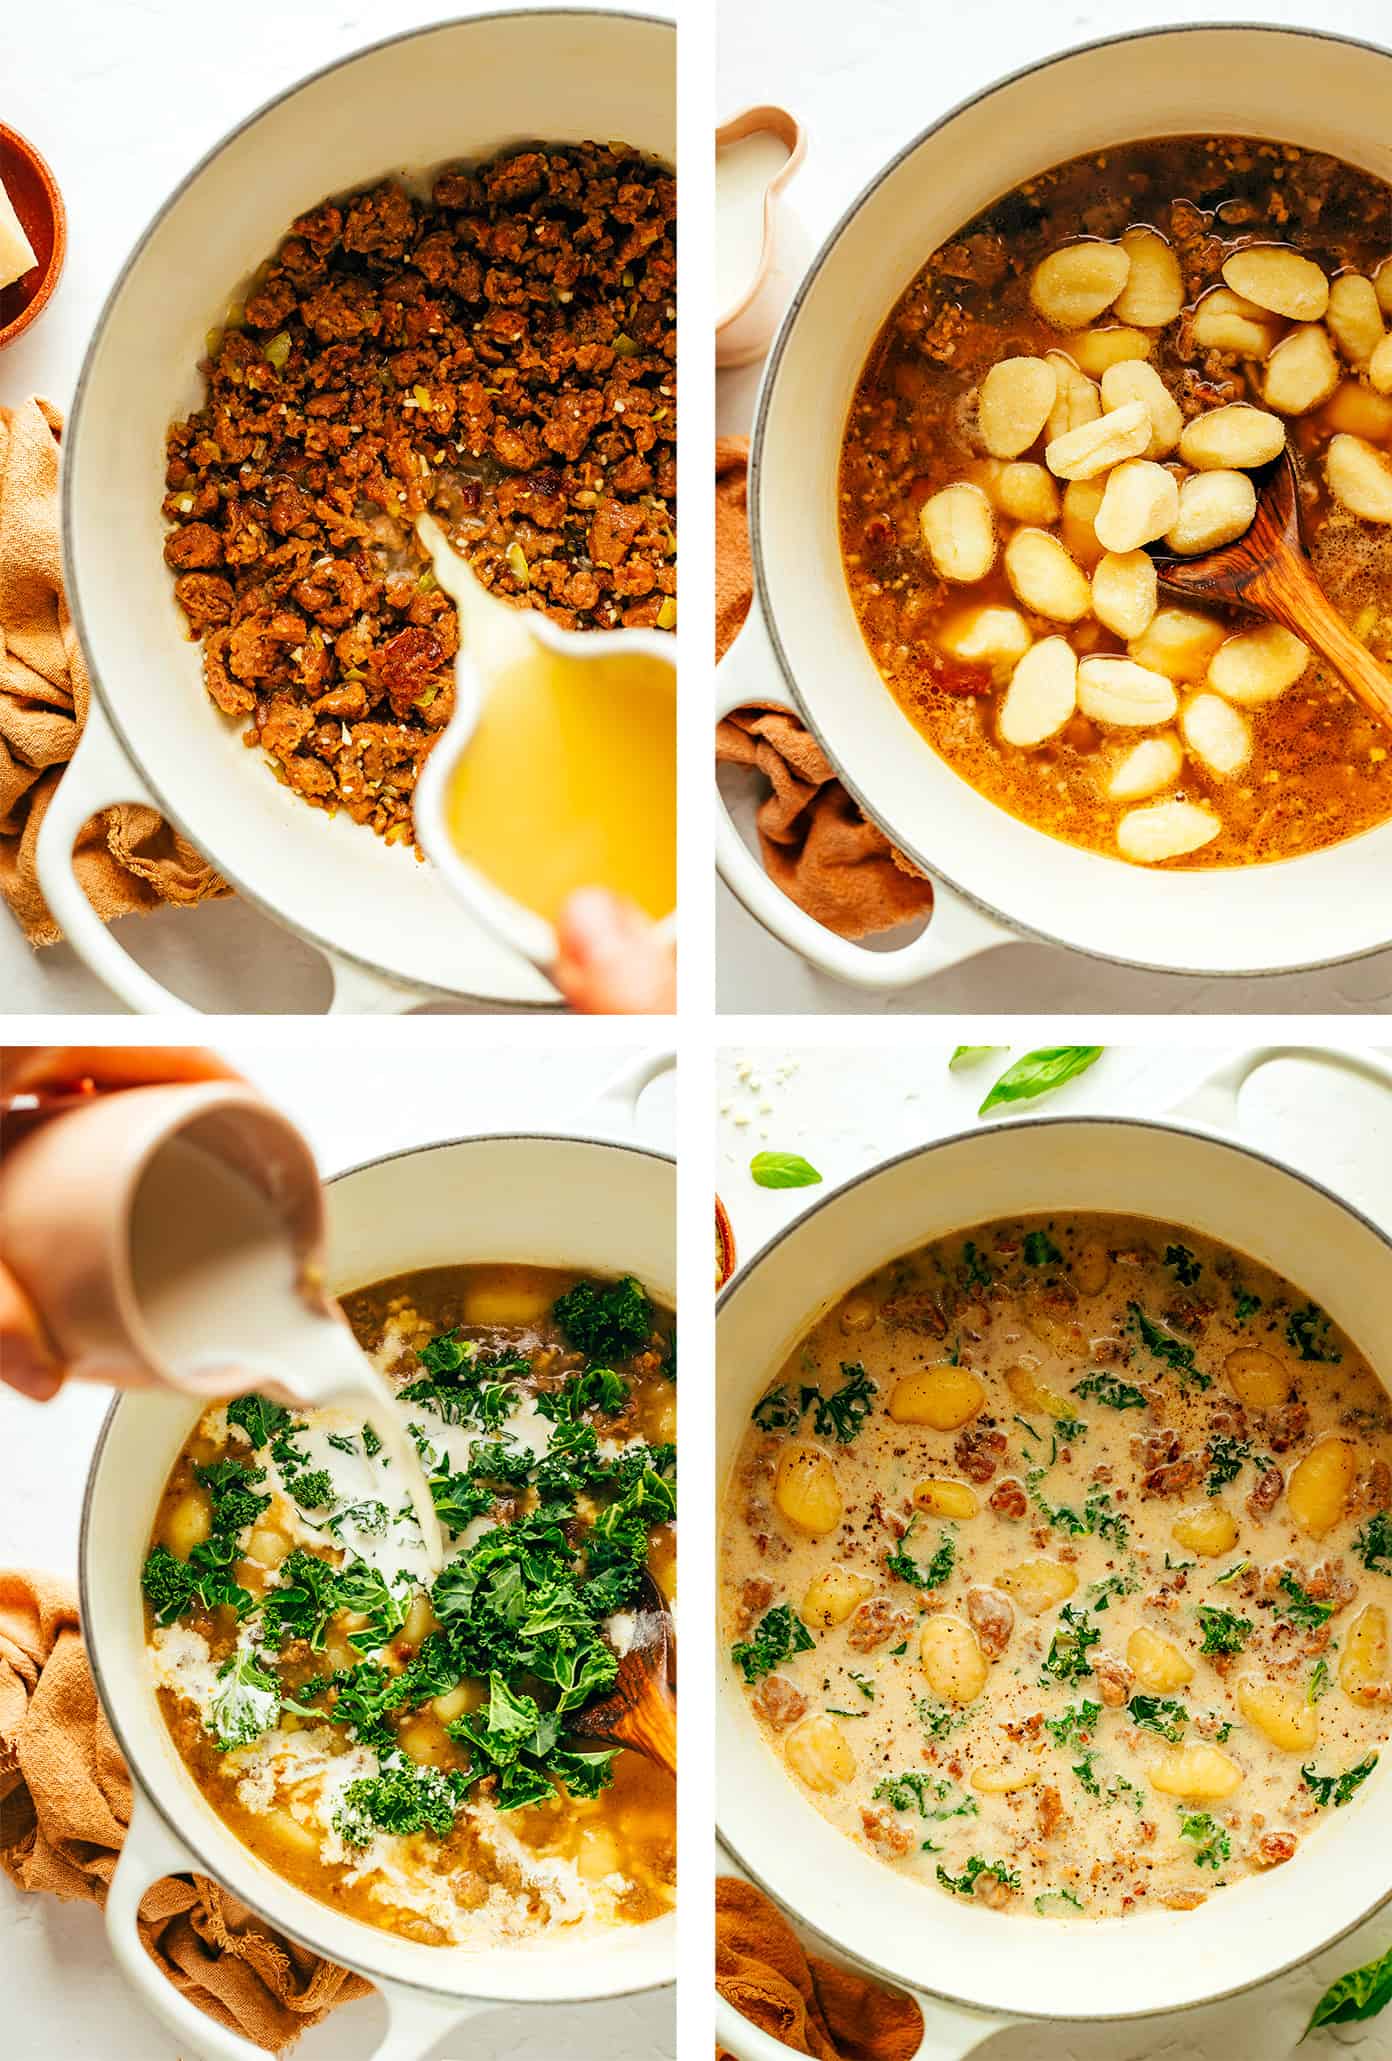 Step by step photos showing how to make zuppa toscana